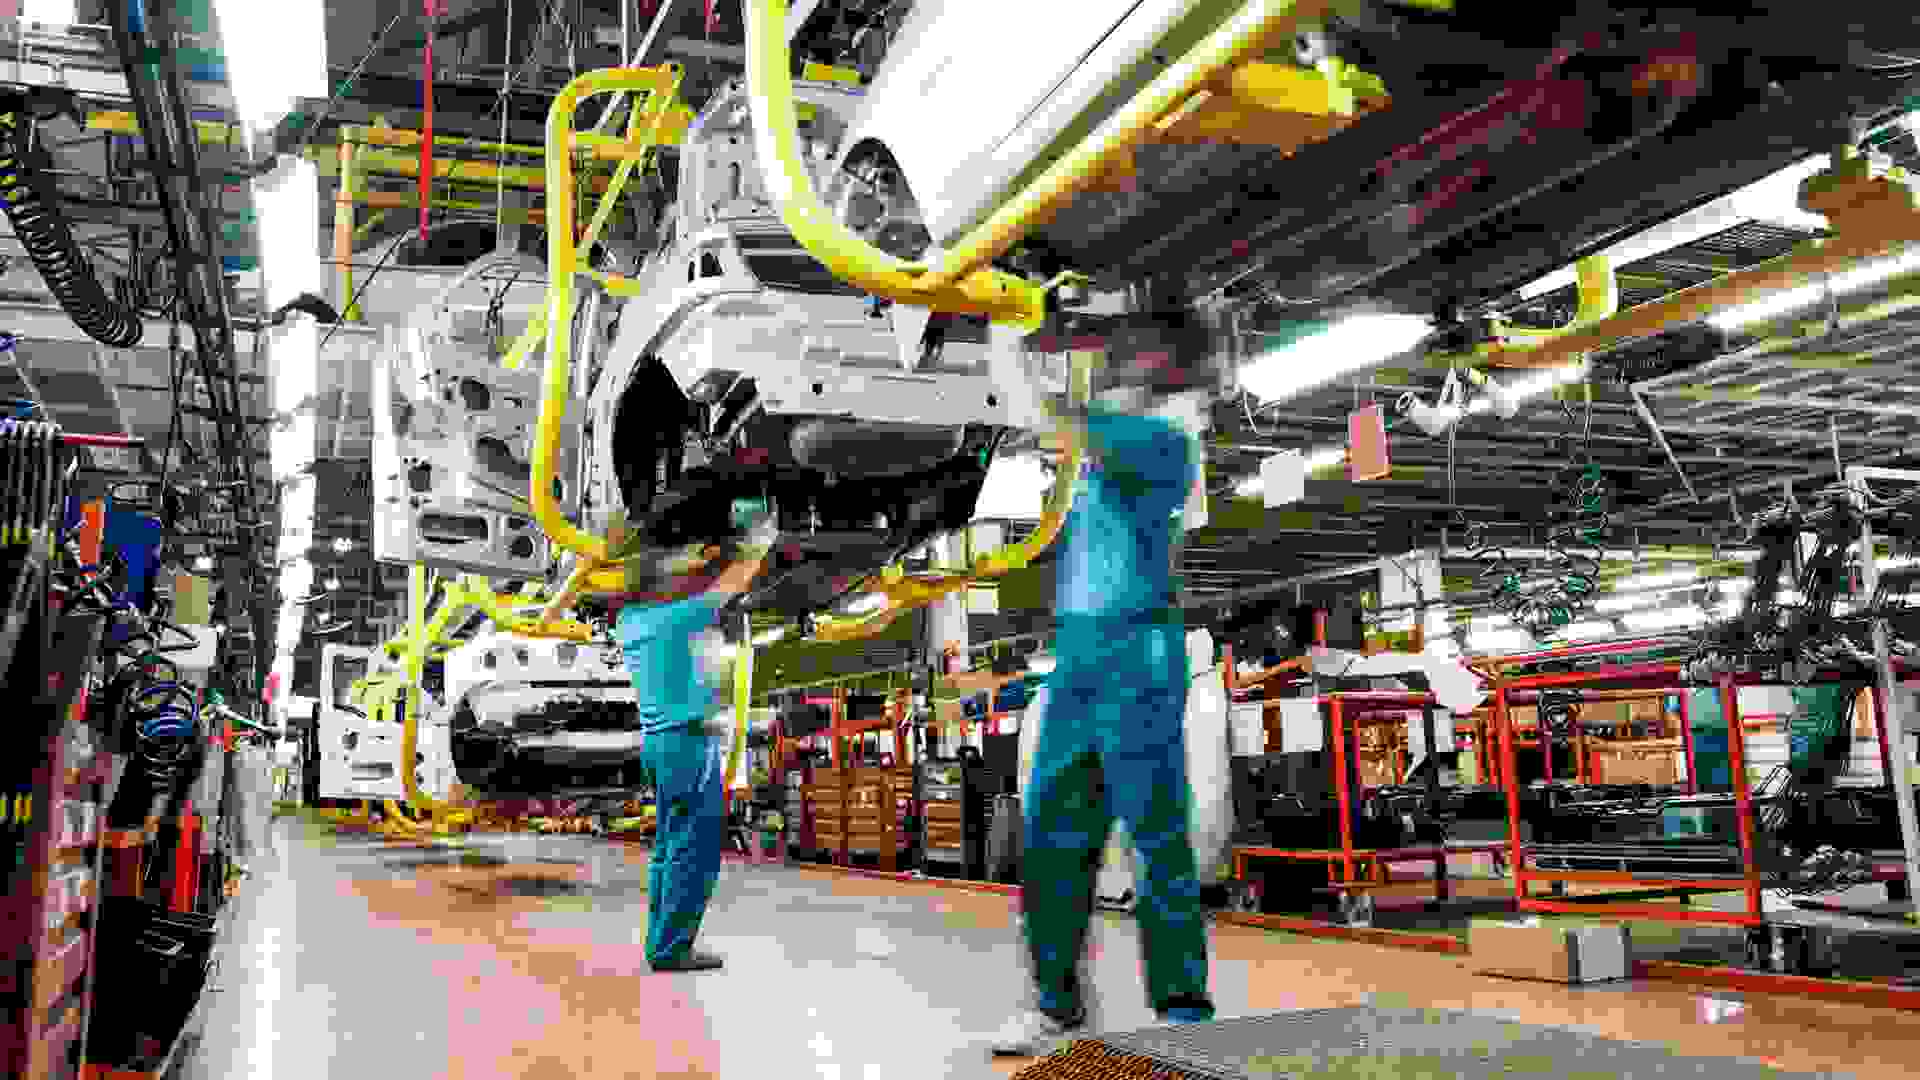 Two workers wearing green shirts and blue pants work underneath a car in an automobile factory.